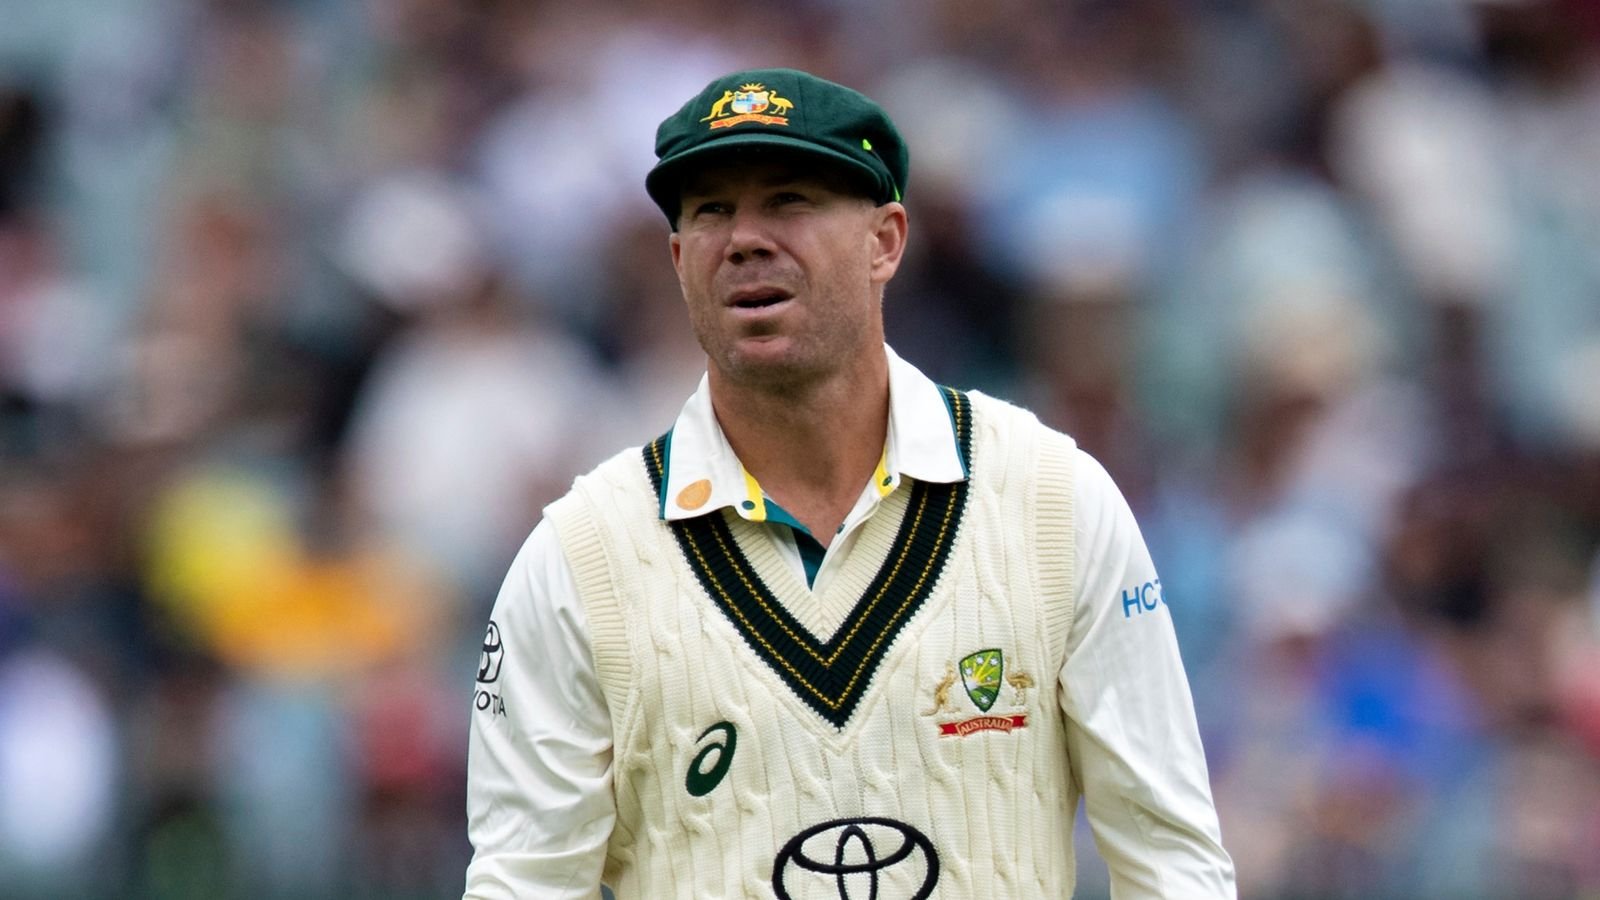 David Warner: Australia batter ‘relieved’ to be reunited with baggy green after social media plea | Cricket News